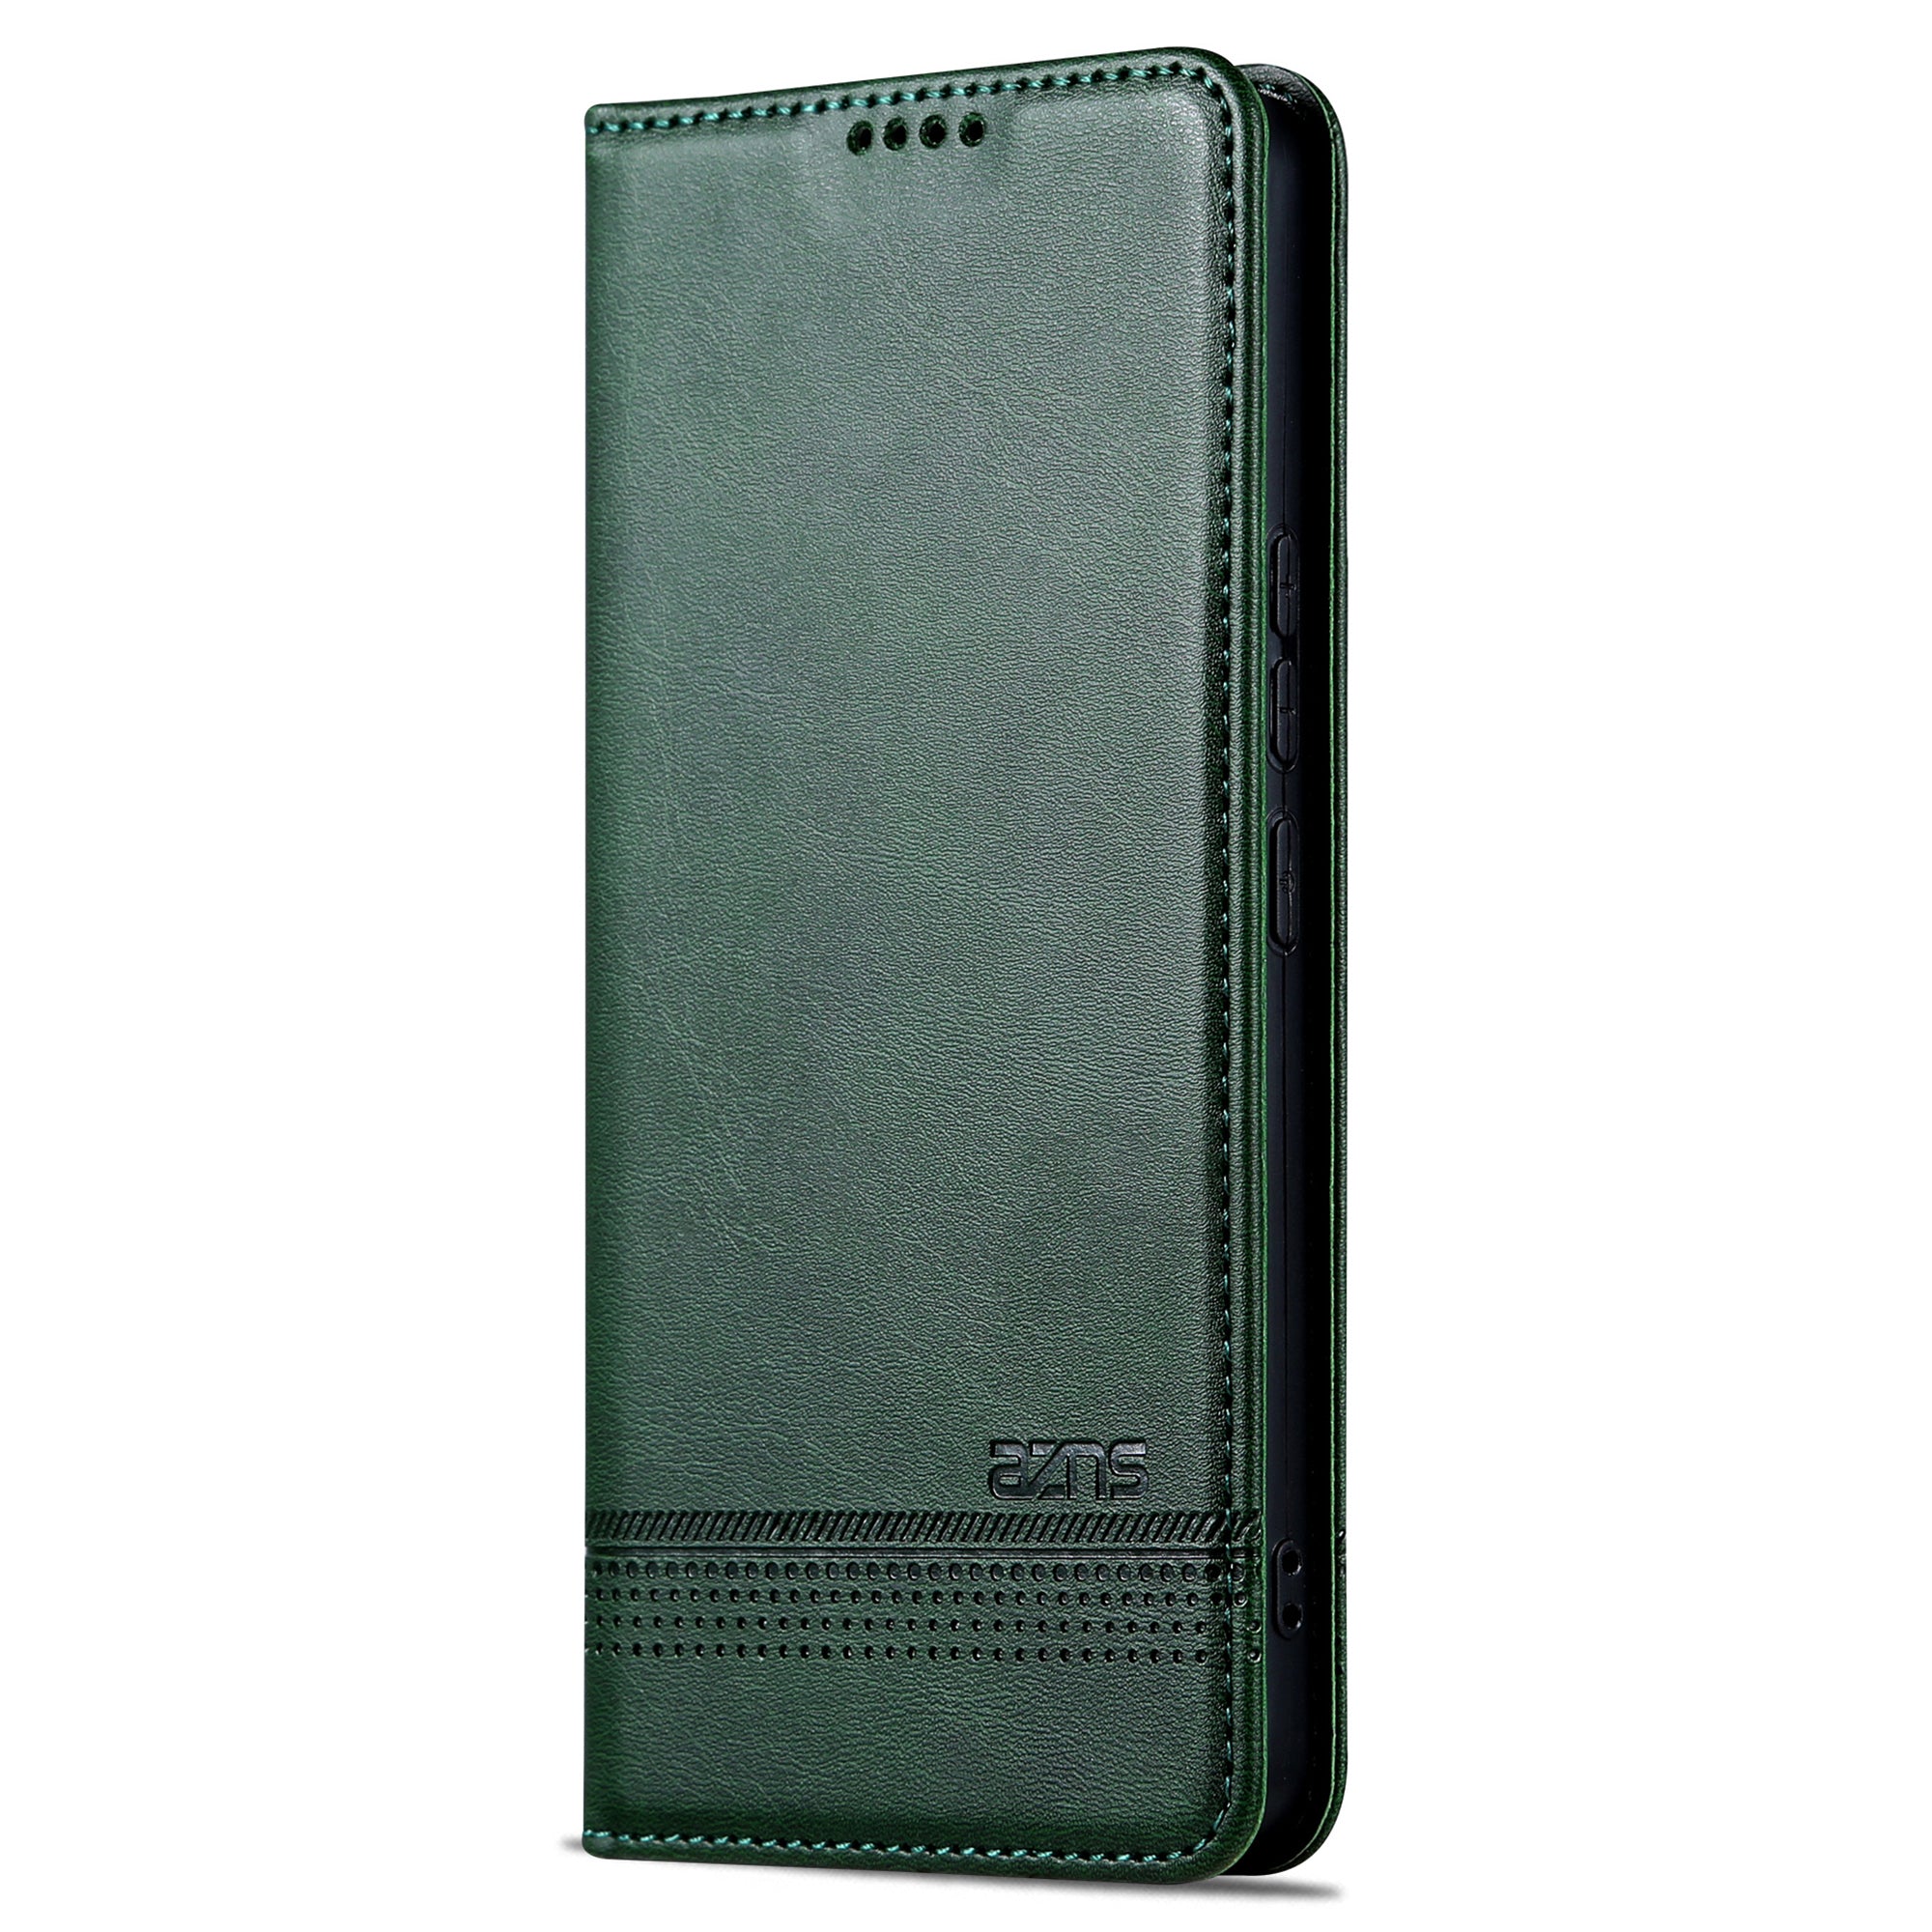 AZNS For Huawei Pura 70 Pro / Pura 70 Pro+ Case PU Leather Folio Wallet Magnetic Auto-absorbed Phone Cover - Green